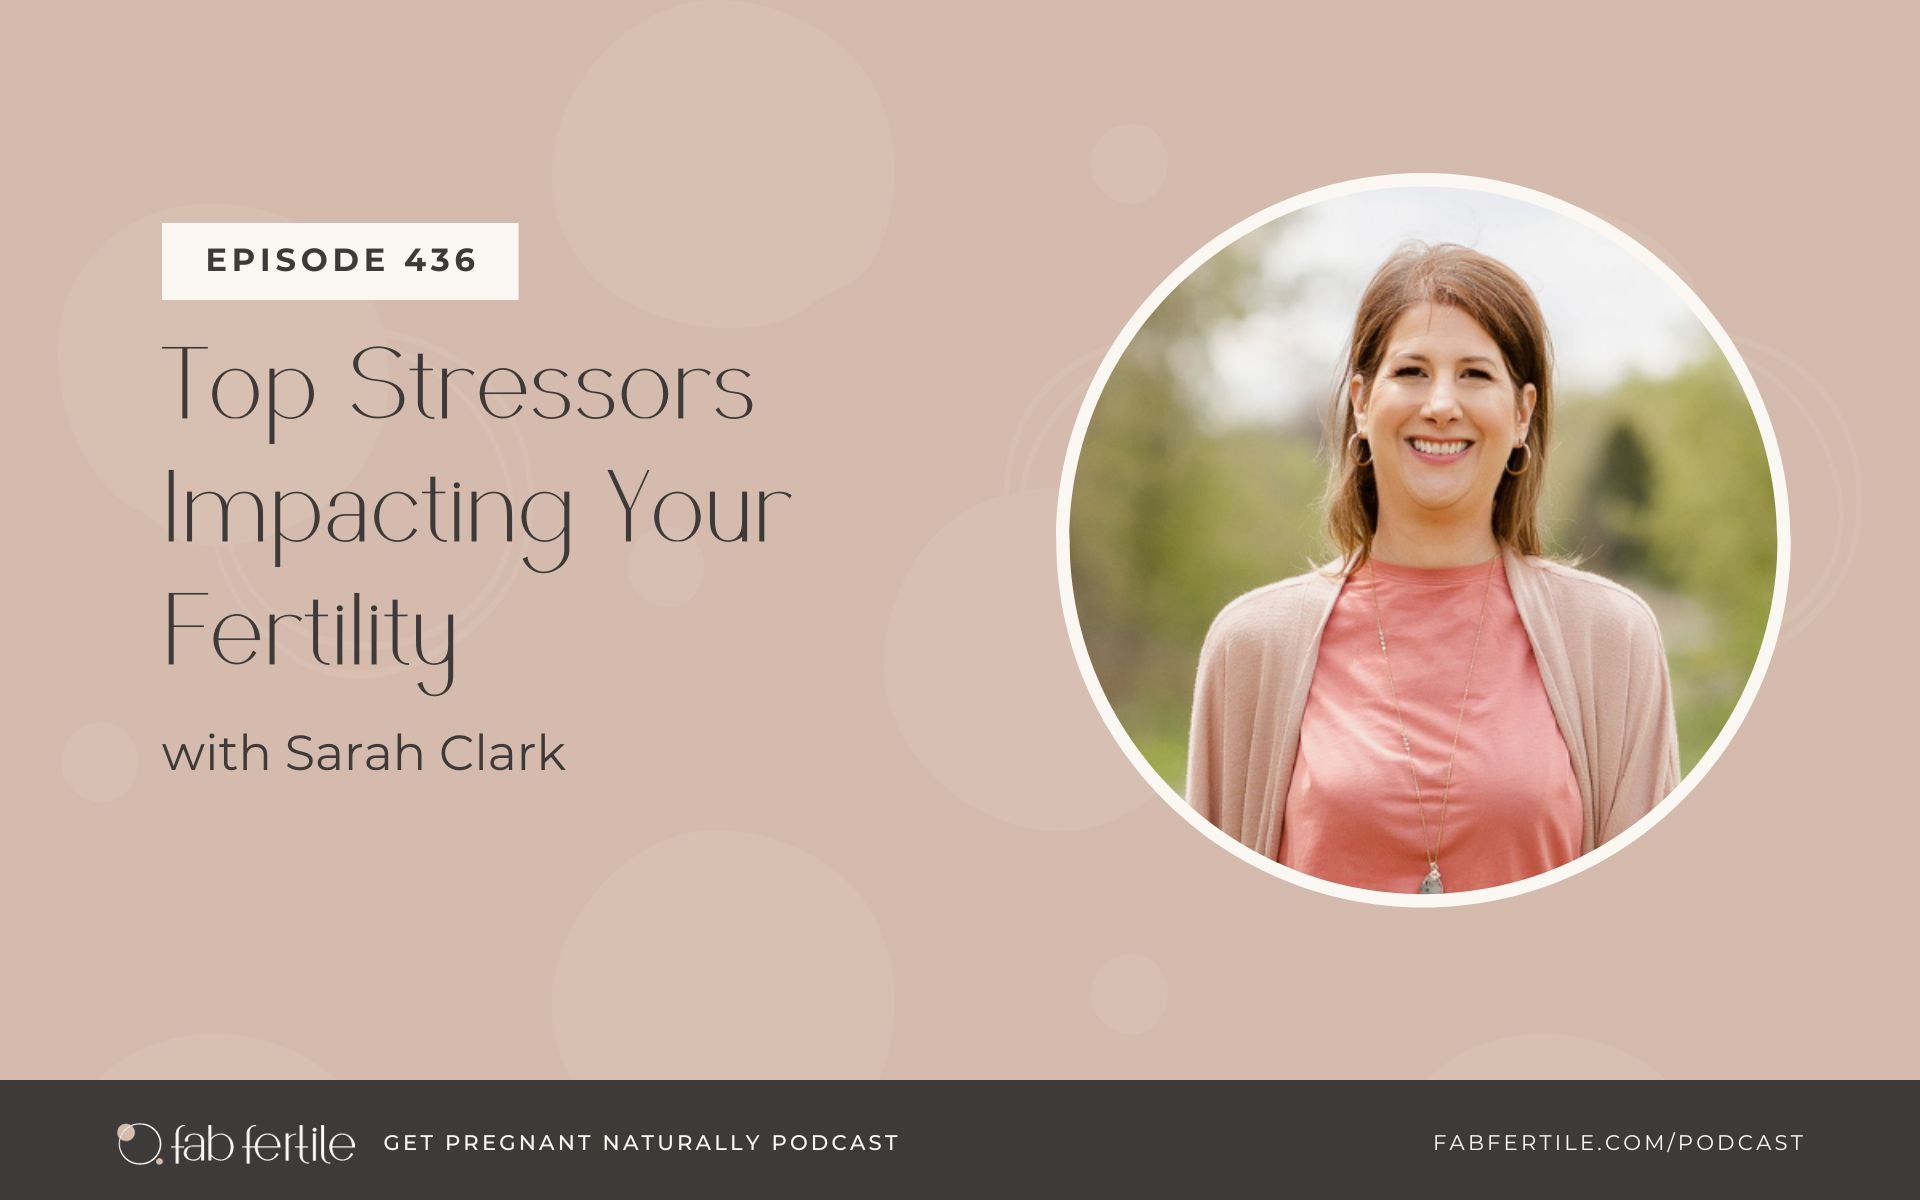 Top Stressors Impacting Your Fertility